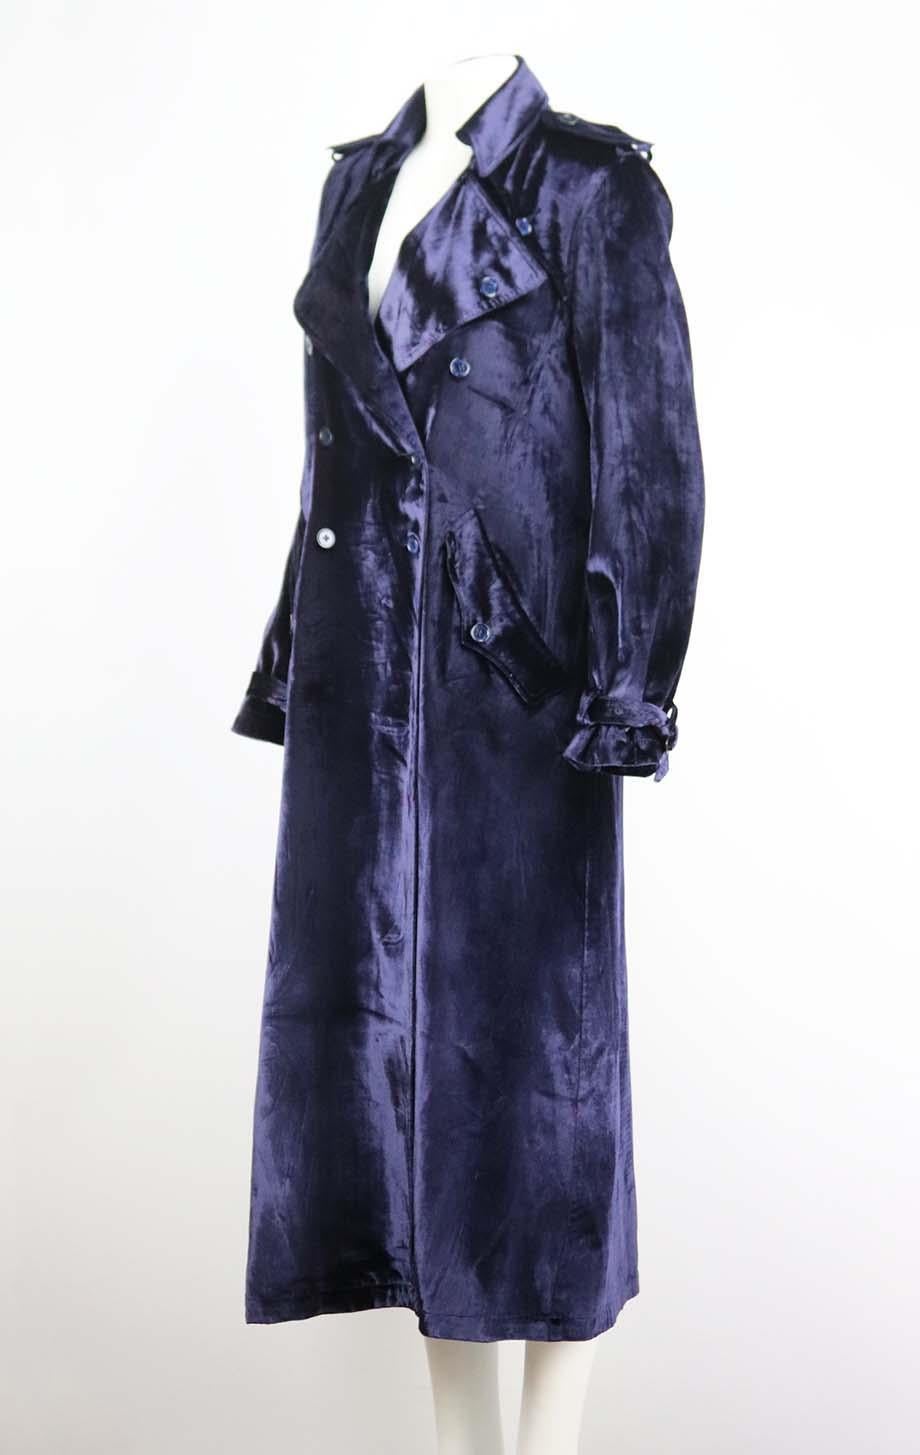 This trench coat by Fleur du Mal is made from luxurious navy velvet that drapes beautifully and creates such an elevated vibe, it's designed in a slightly loose, double-breasted silhouette and has traditional shoulder epaulettes and buckle-fastening